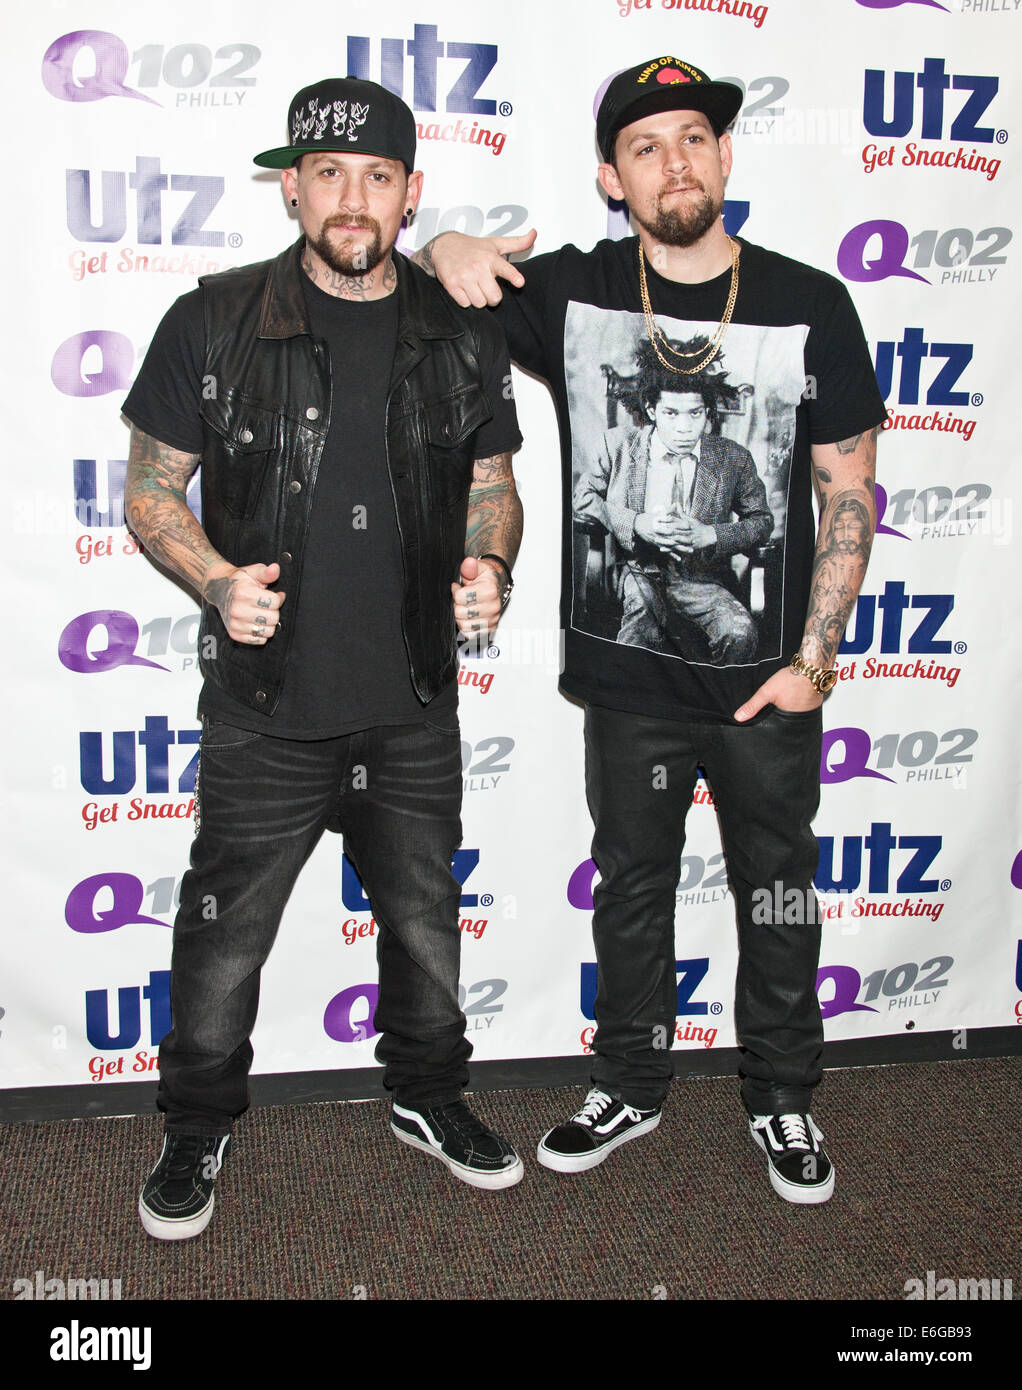 Bala Cynwyd, Pennsylvania, USA. 21st August, 2014. (L to R) Benji Madden and Joel Madden of American Pop Rock Duo The Madden Brothers Pose at Q102's Performance Theatre on August 21, 2014 in Bala Cynwyd, Pennsylvania, United States. Credit:  Paul Froggatt/Alamy Live News Stock Photo